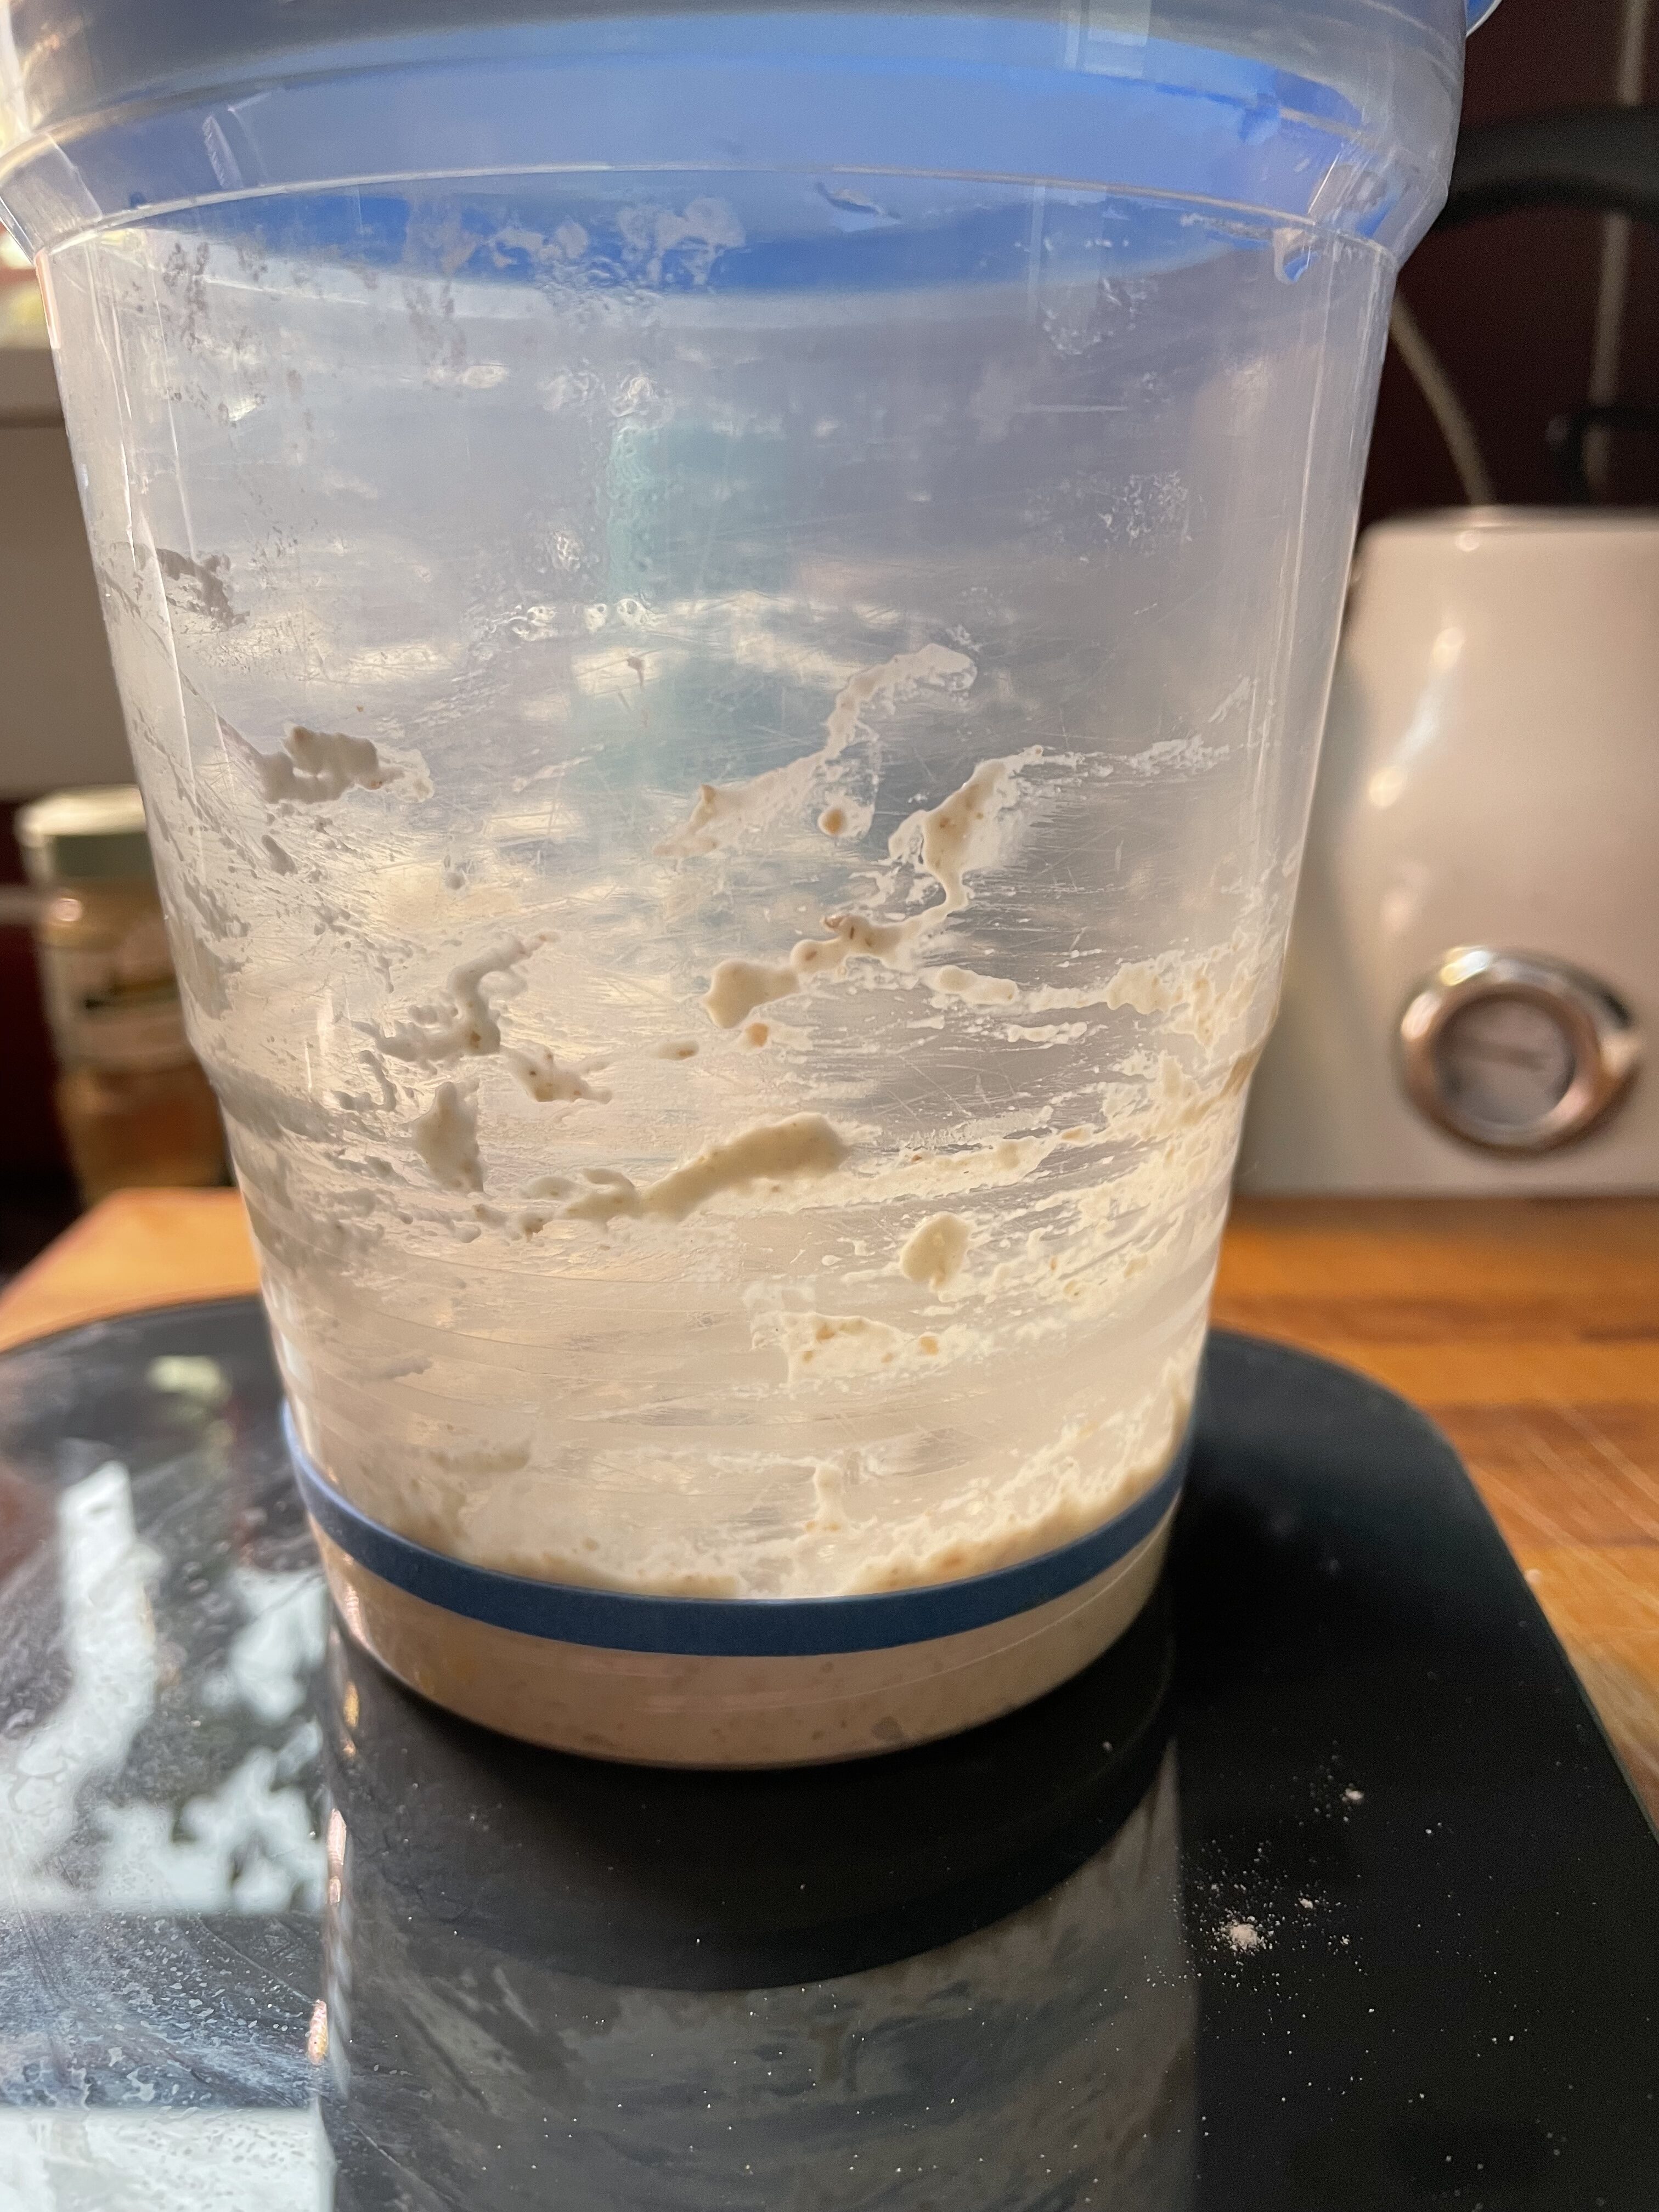 How to make a sourdough starter photo showing elastic band around container.